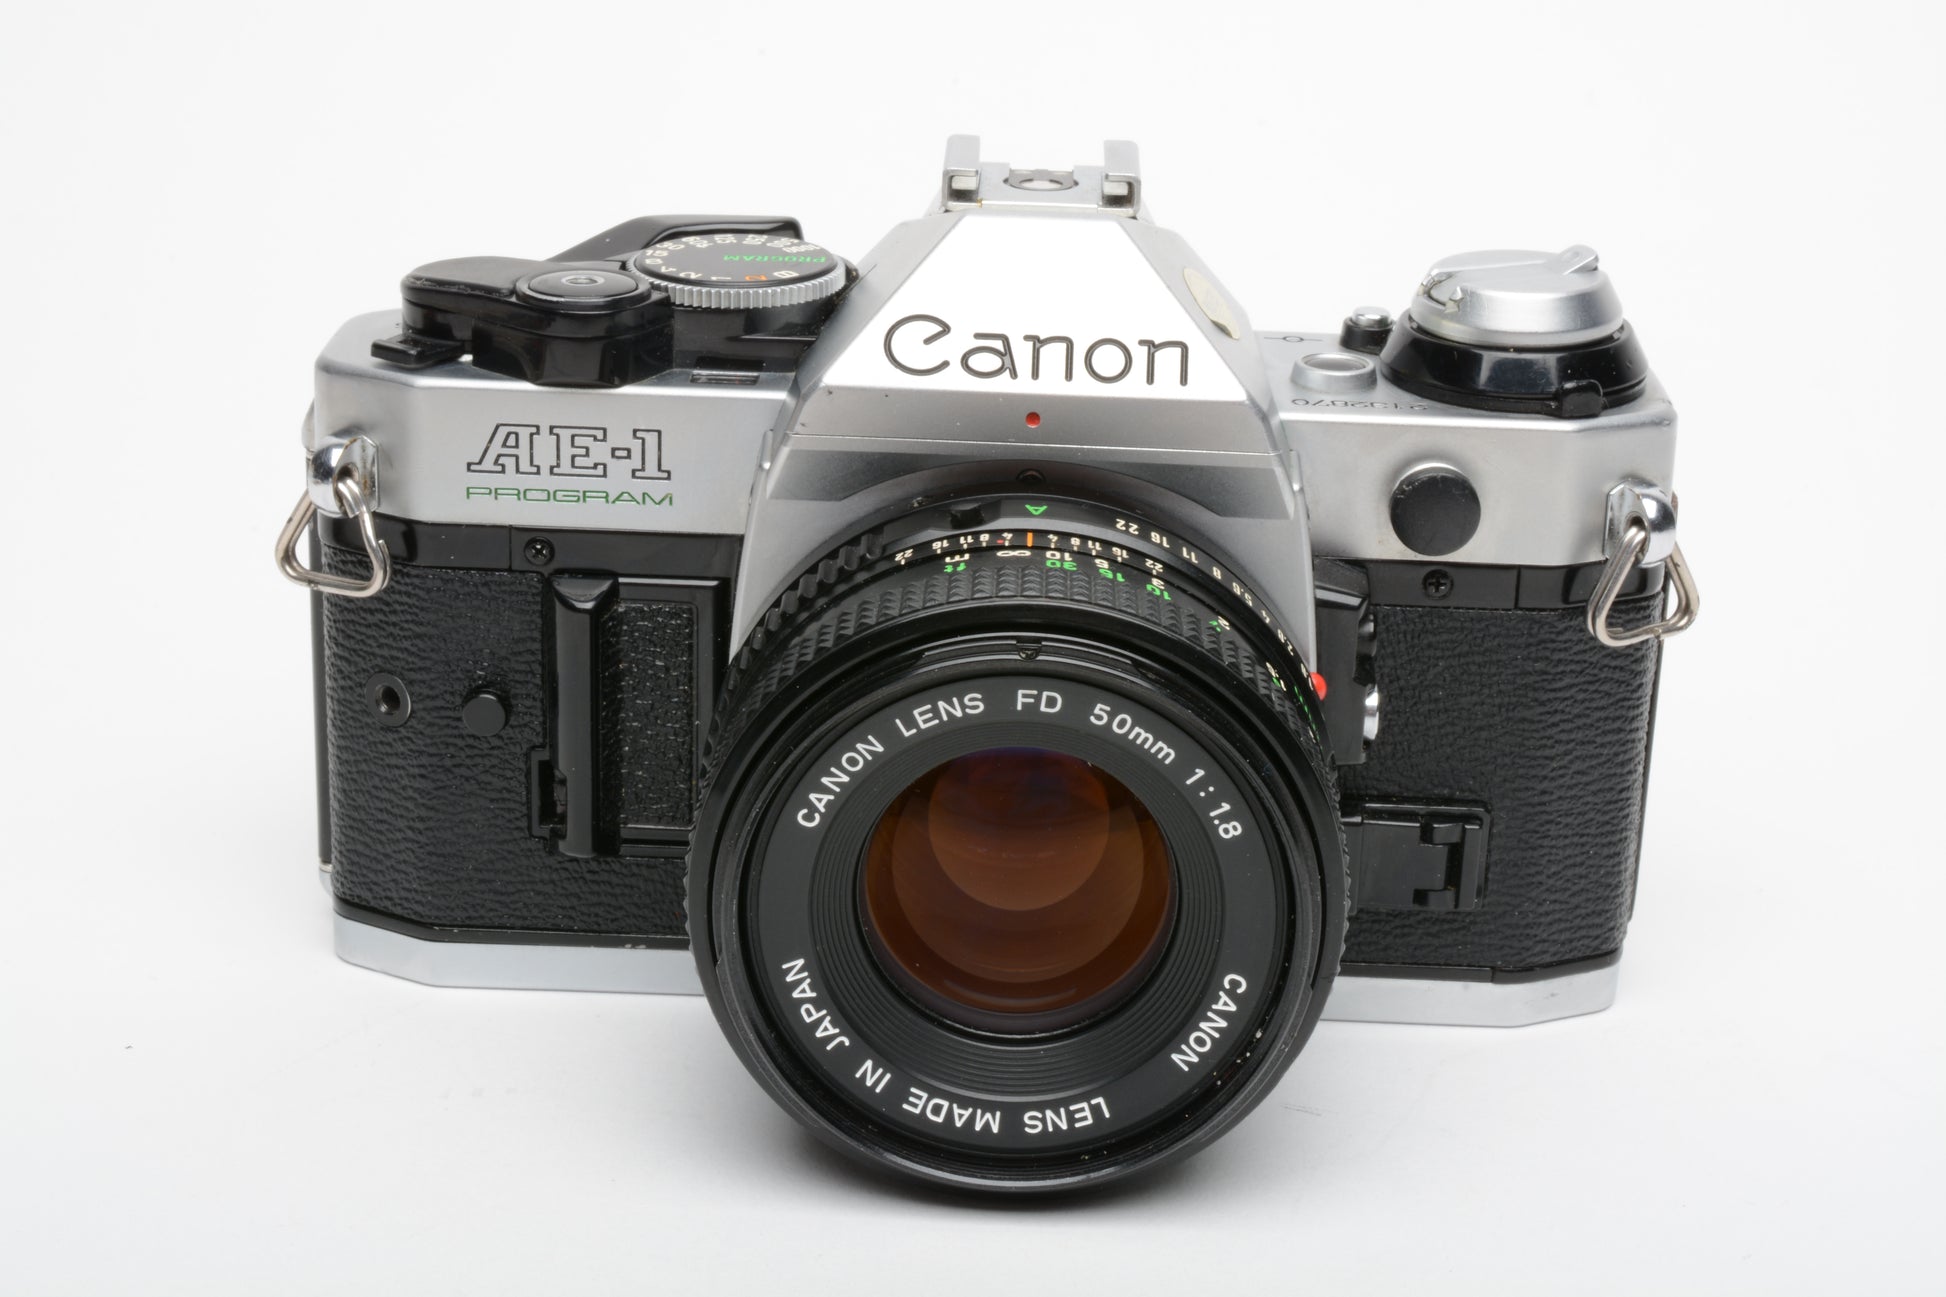 Canon AE-1 35mm SLR Film Camera with Canon 50mm f/1.8 FD Lens - WORKING  PERFECT!